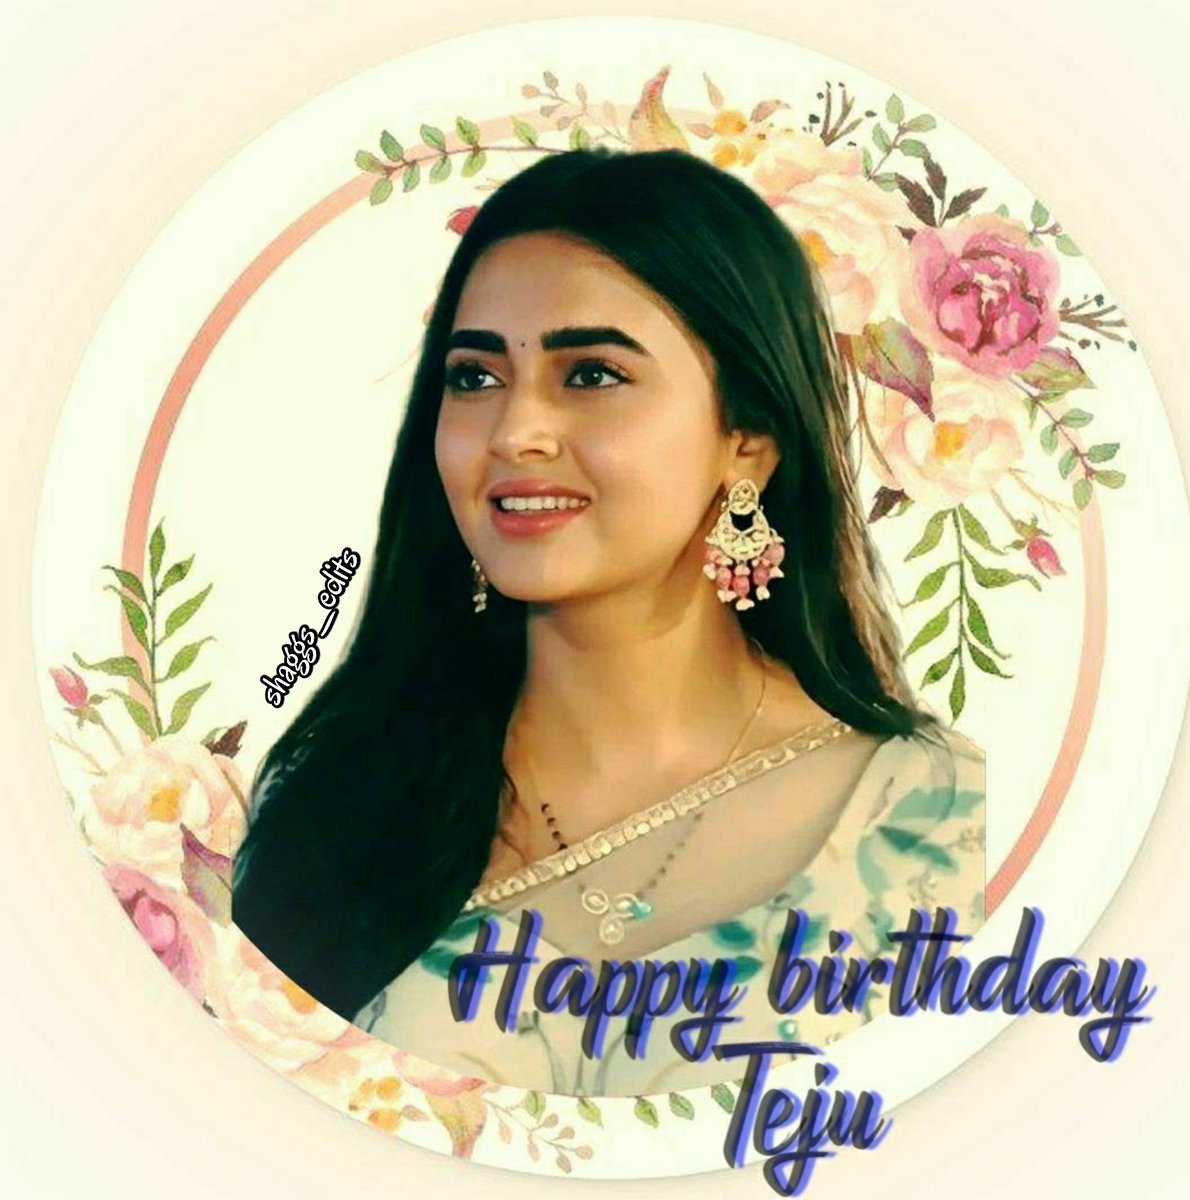 “True happiness comes from the joy of deeds well done, the zest of creating things new.”

HBD TEJASSWI PRAKASH